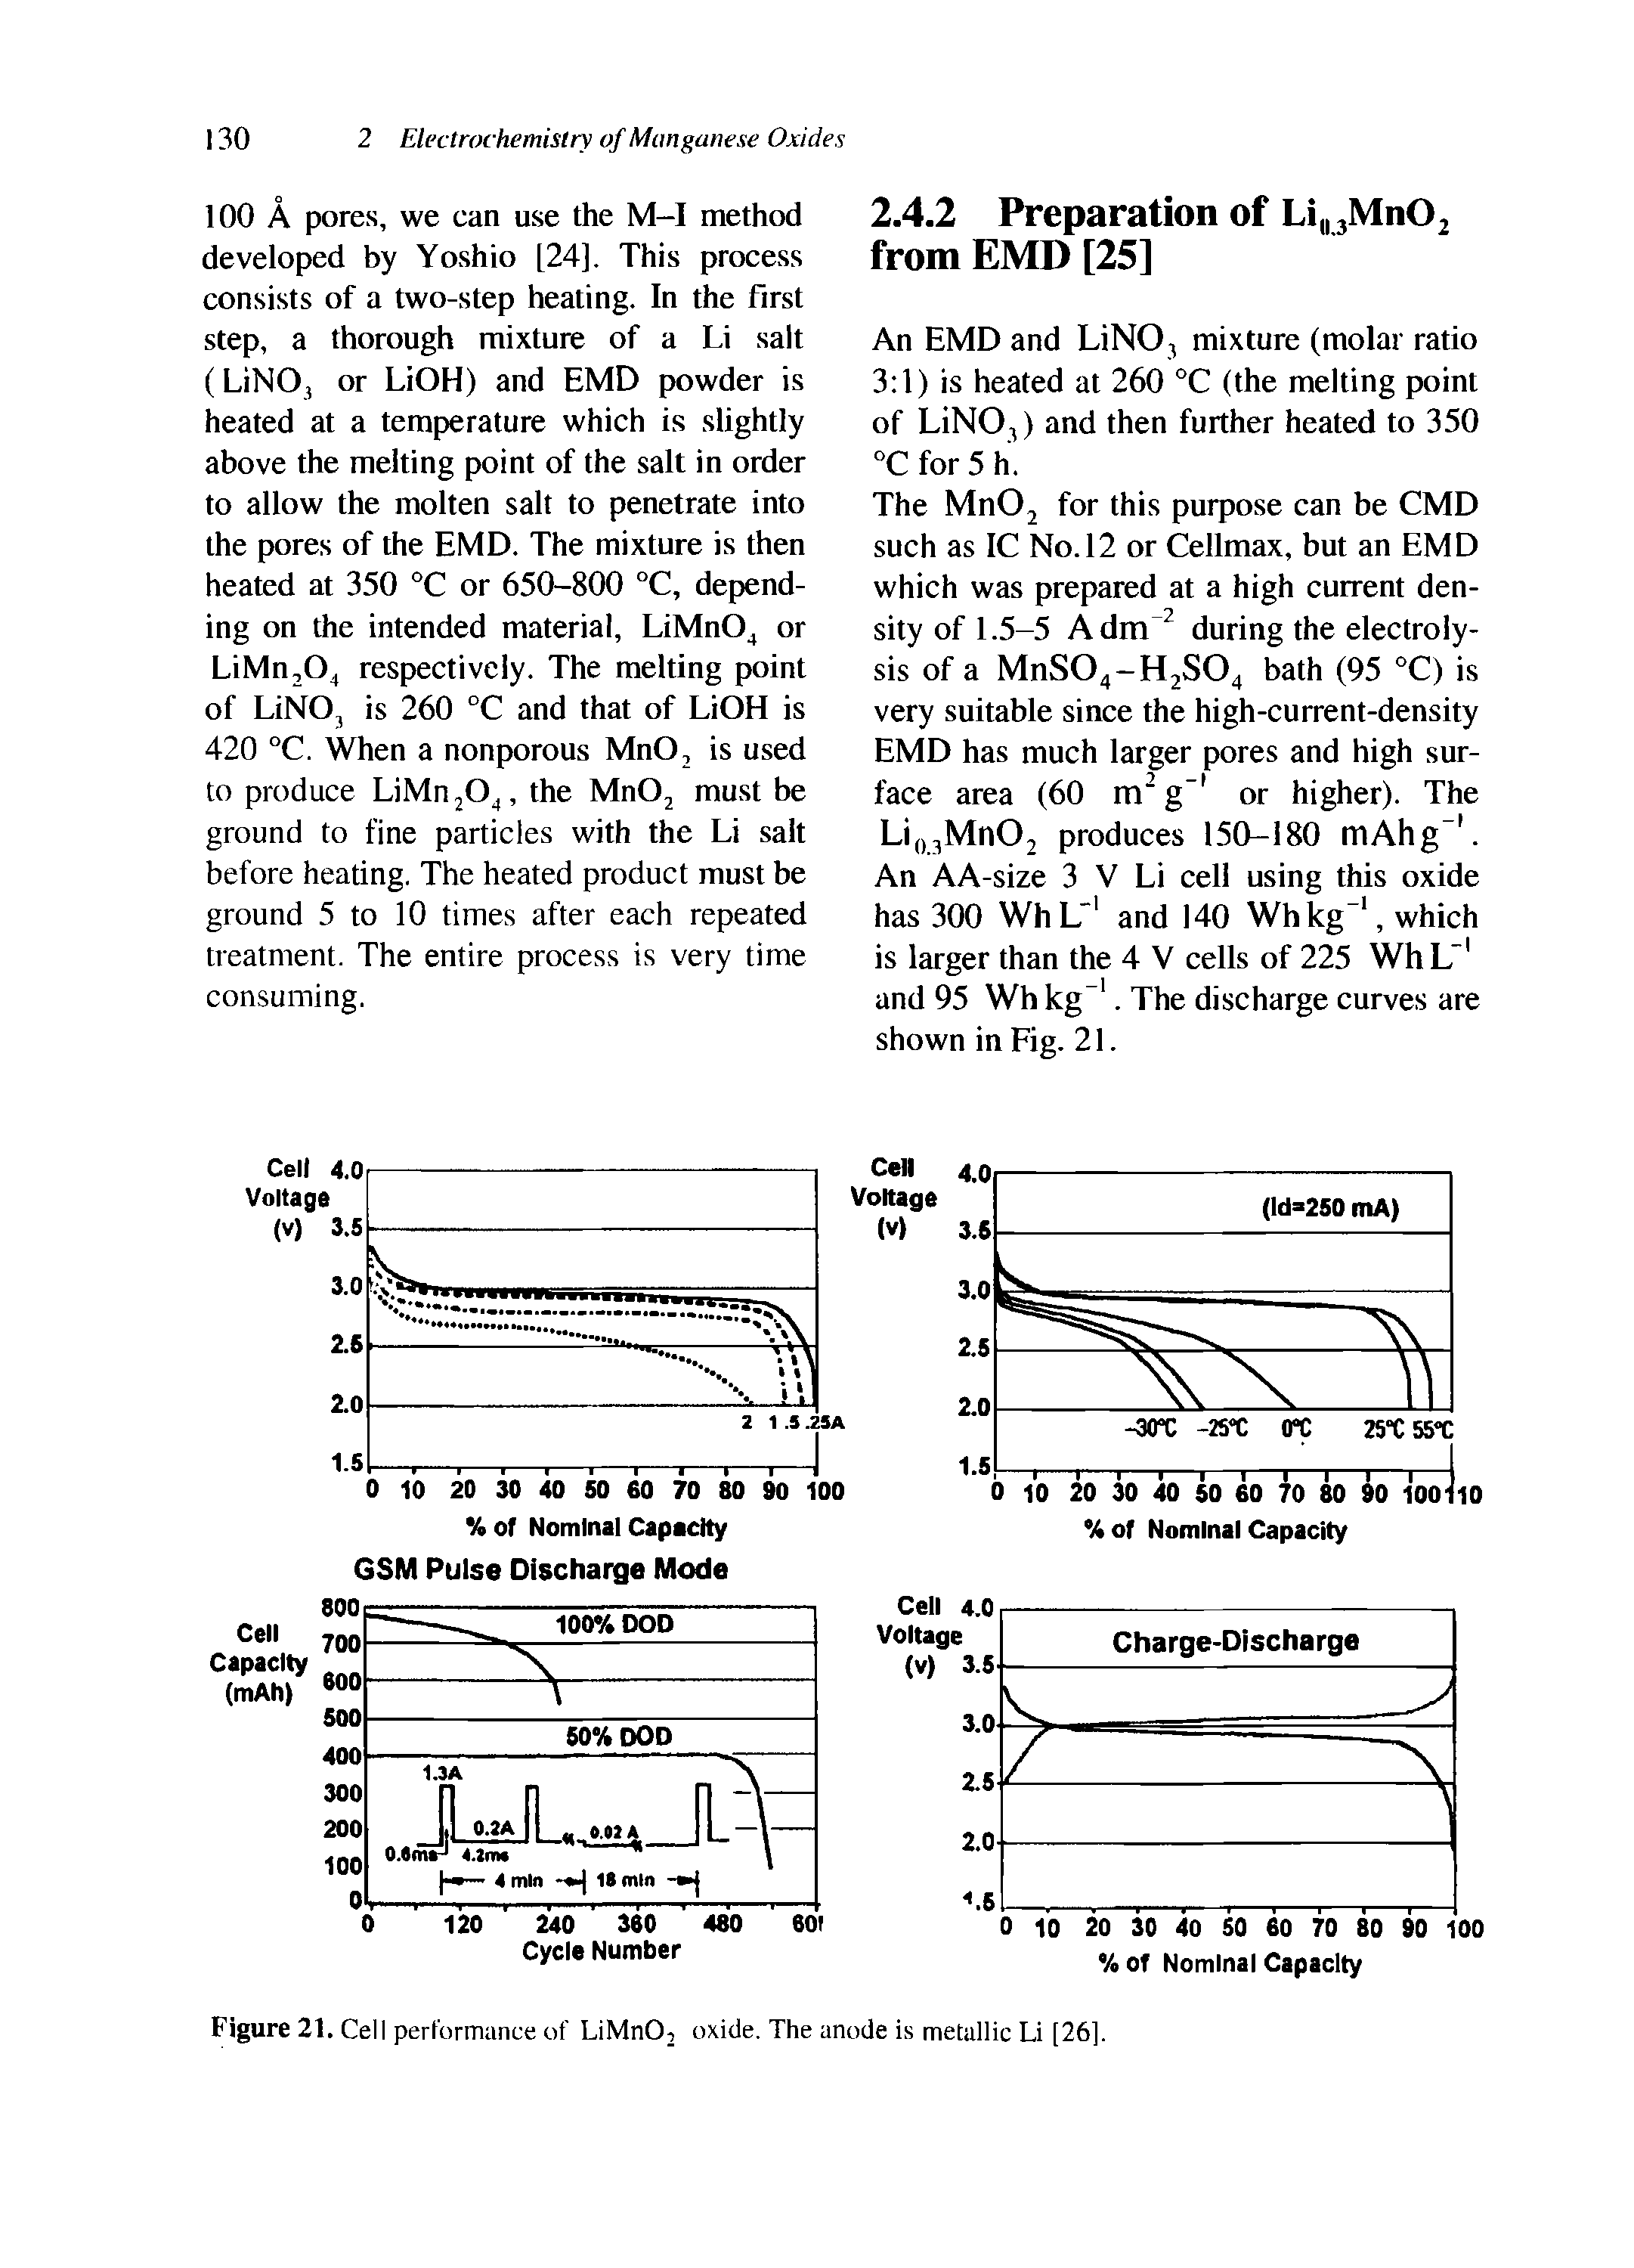 Figure 21. Cell performance of LiMnO, oxide. The anode is metallic Li [26].